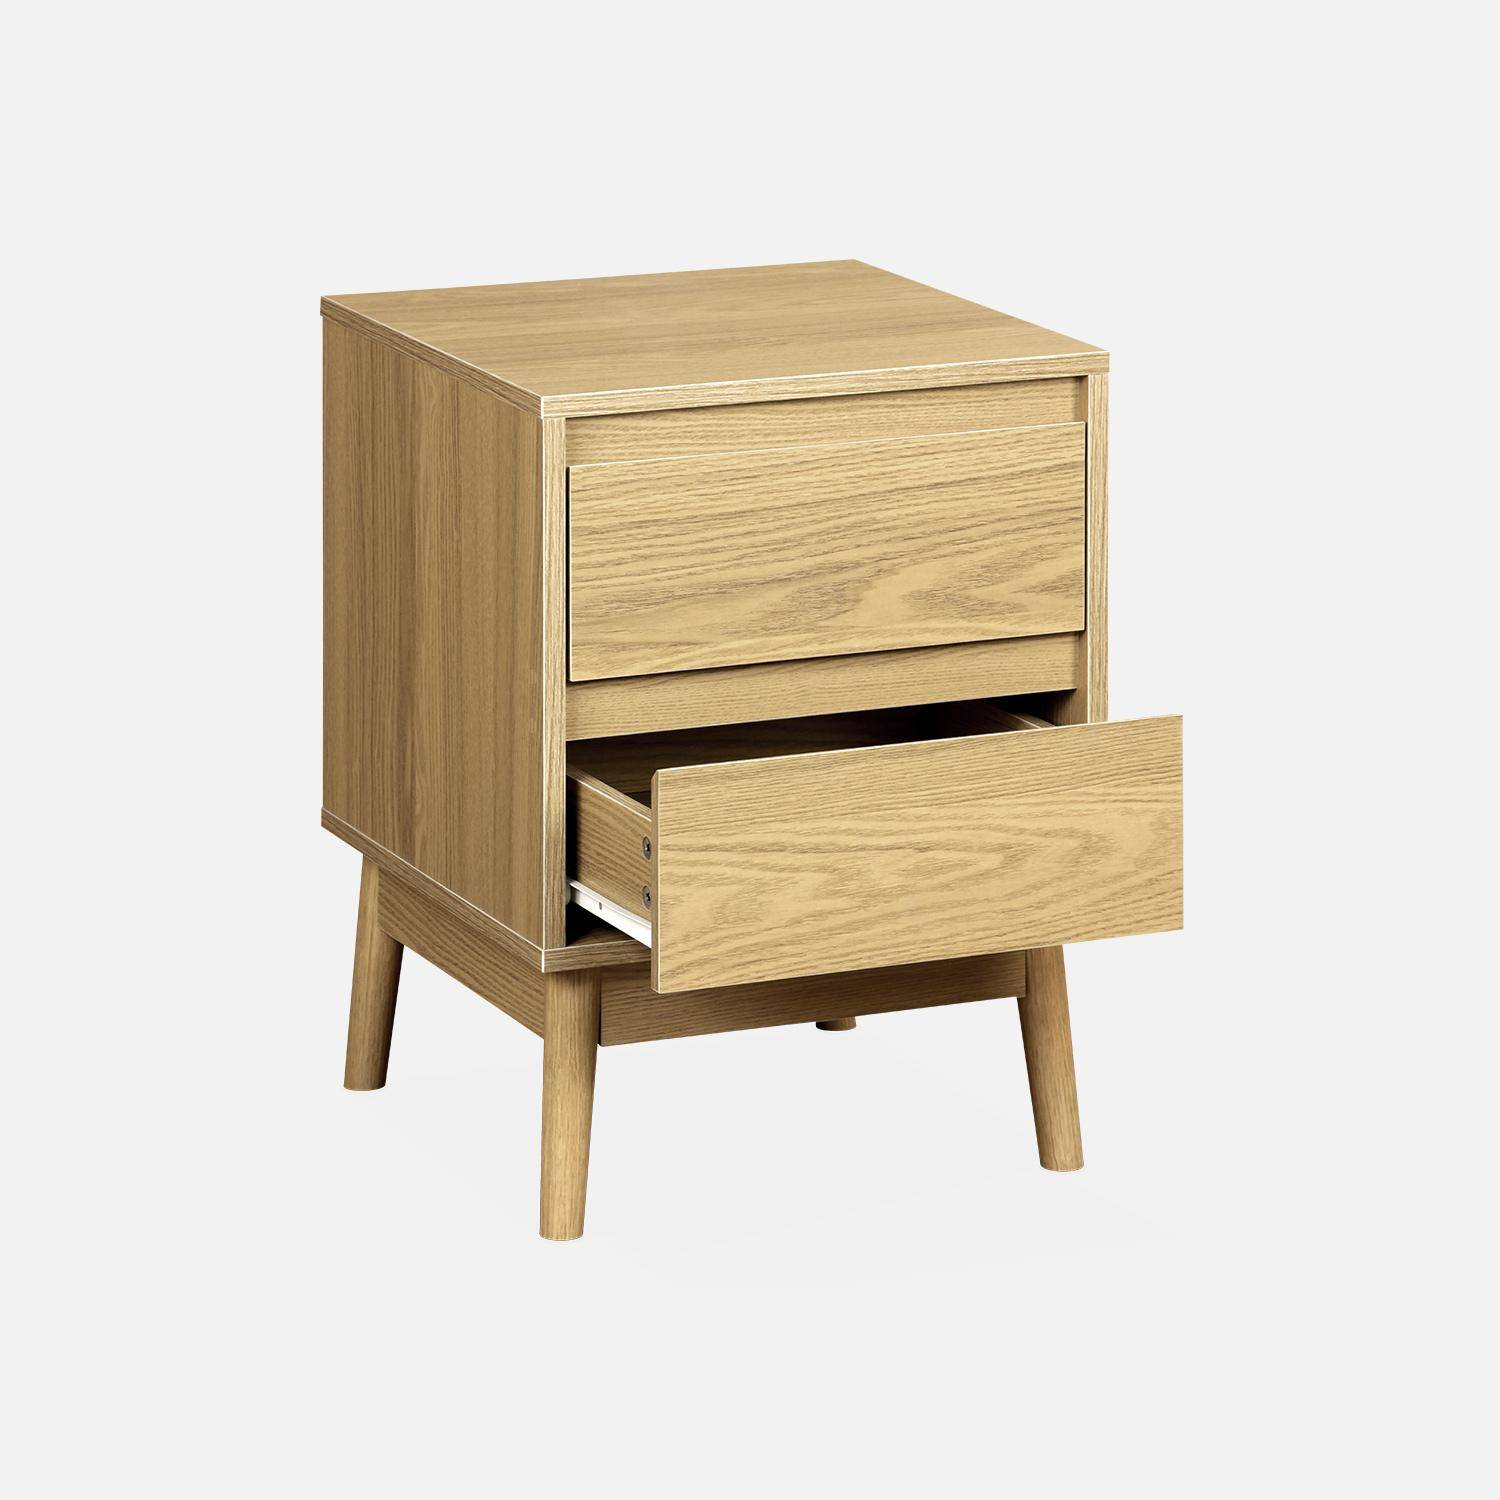 Pair of bedside tables with 2 drawers, 26x40x56cm - Dune - Natural Photo5